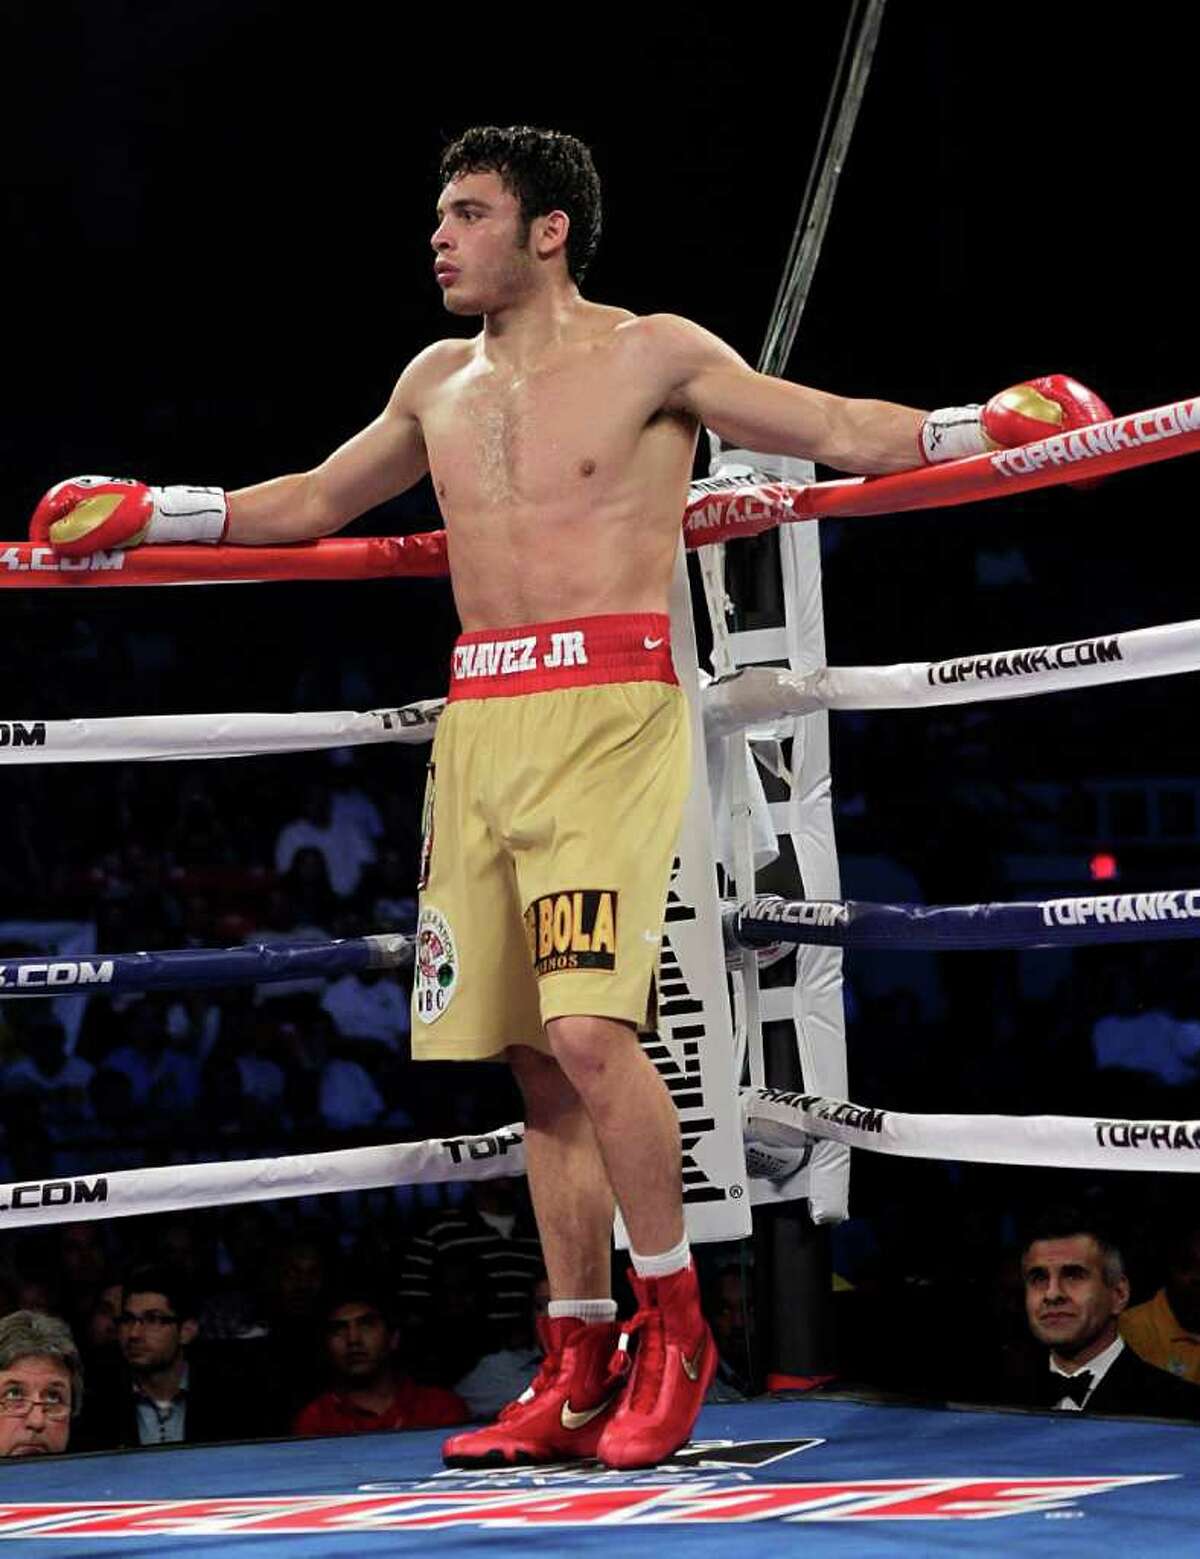 HOUSTON - NOVEMBER 19: Julio Chavez Jr. waits in a neutral corner as his apponent has some tape cut off his boxing glove> at Reliant Arena at Reliant Park on November 19, 2011 in Houston, Texas.